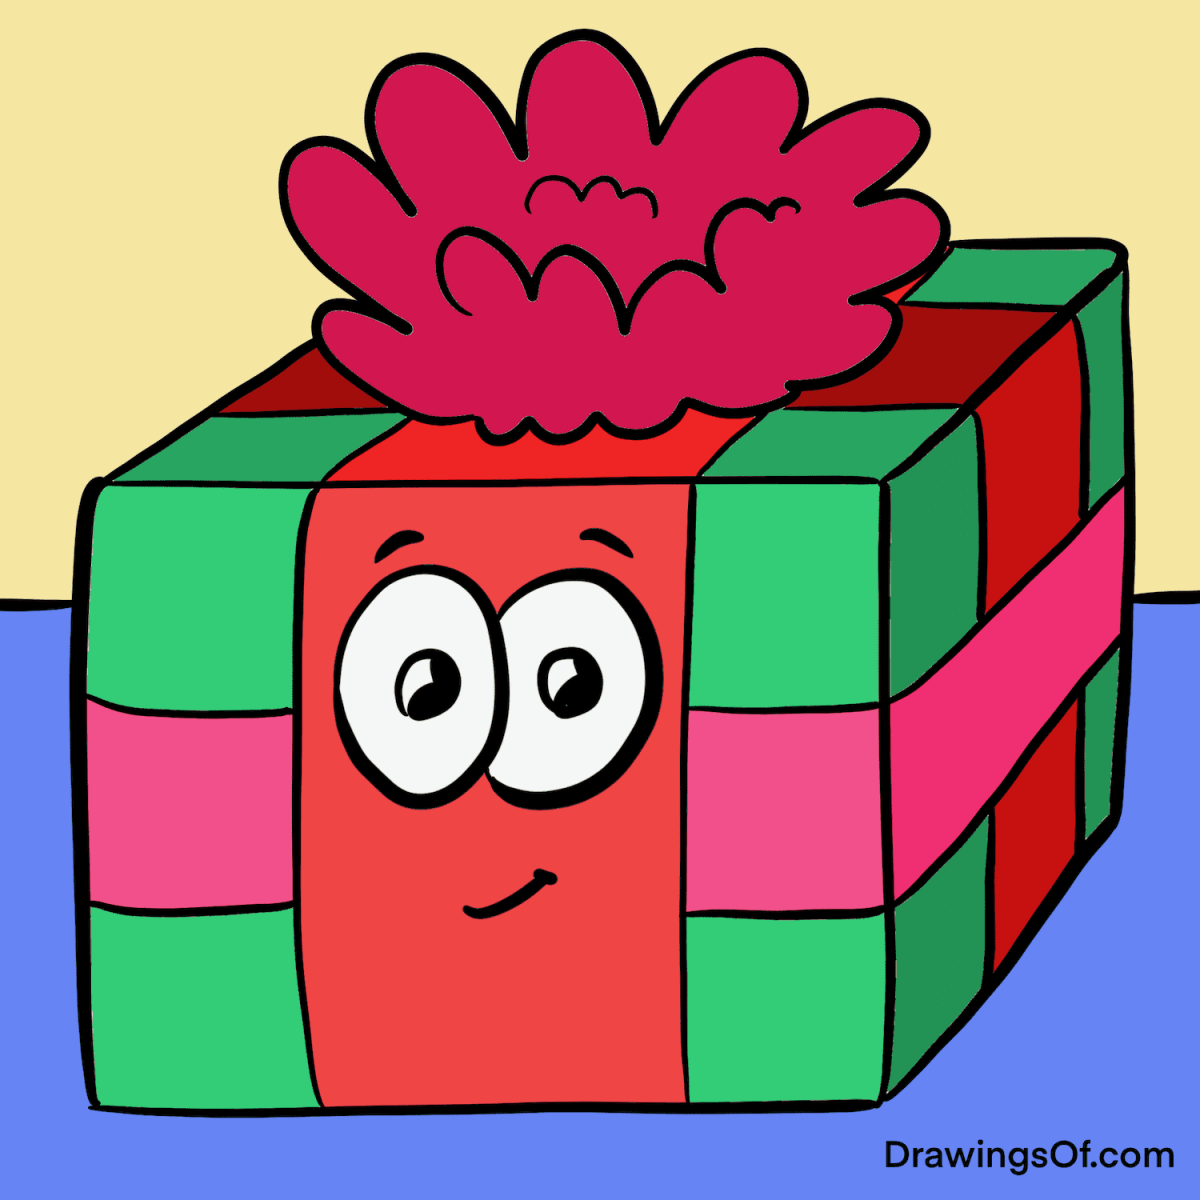 Present drawing gift box cartoons in an easy cute style